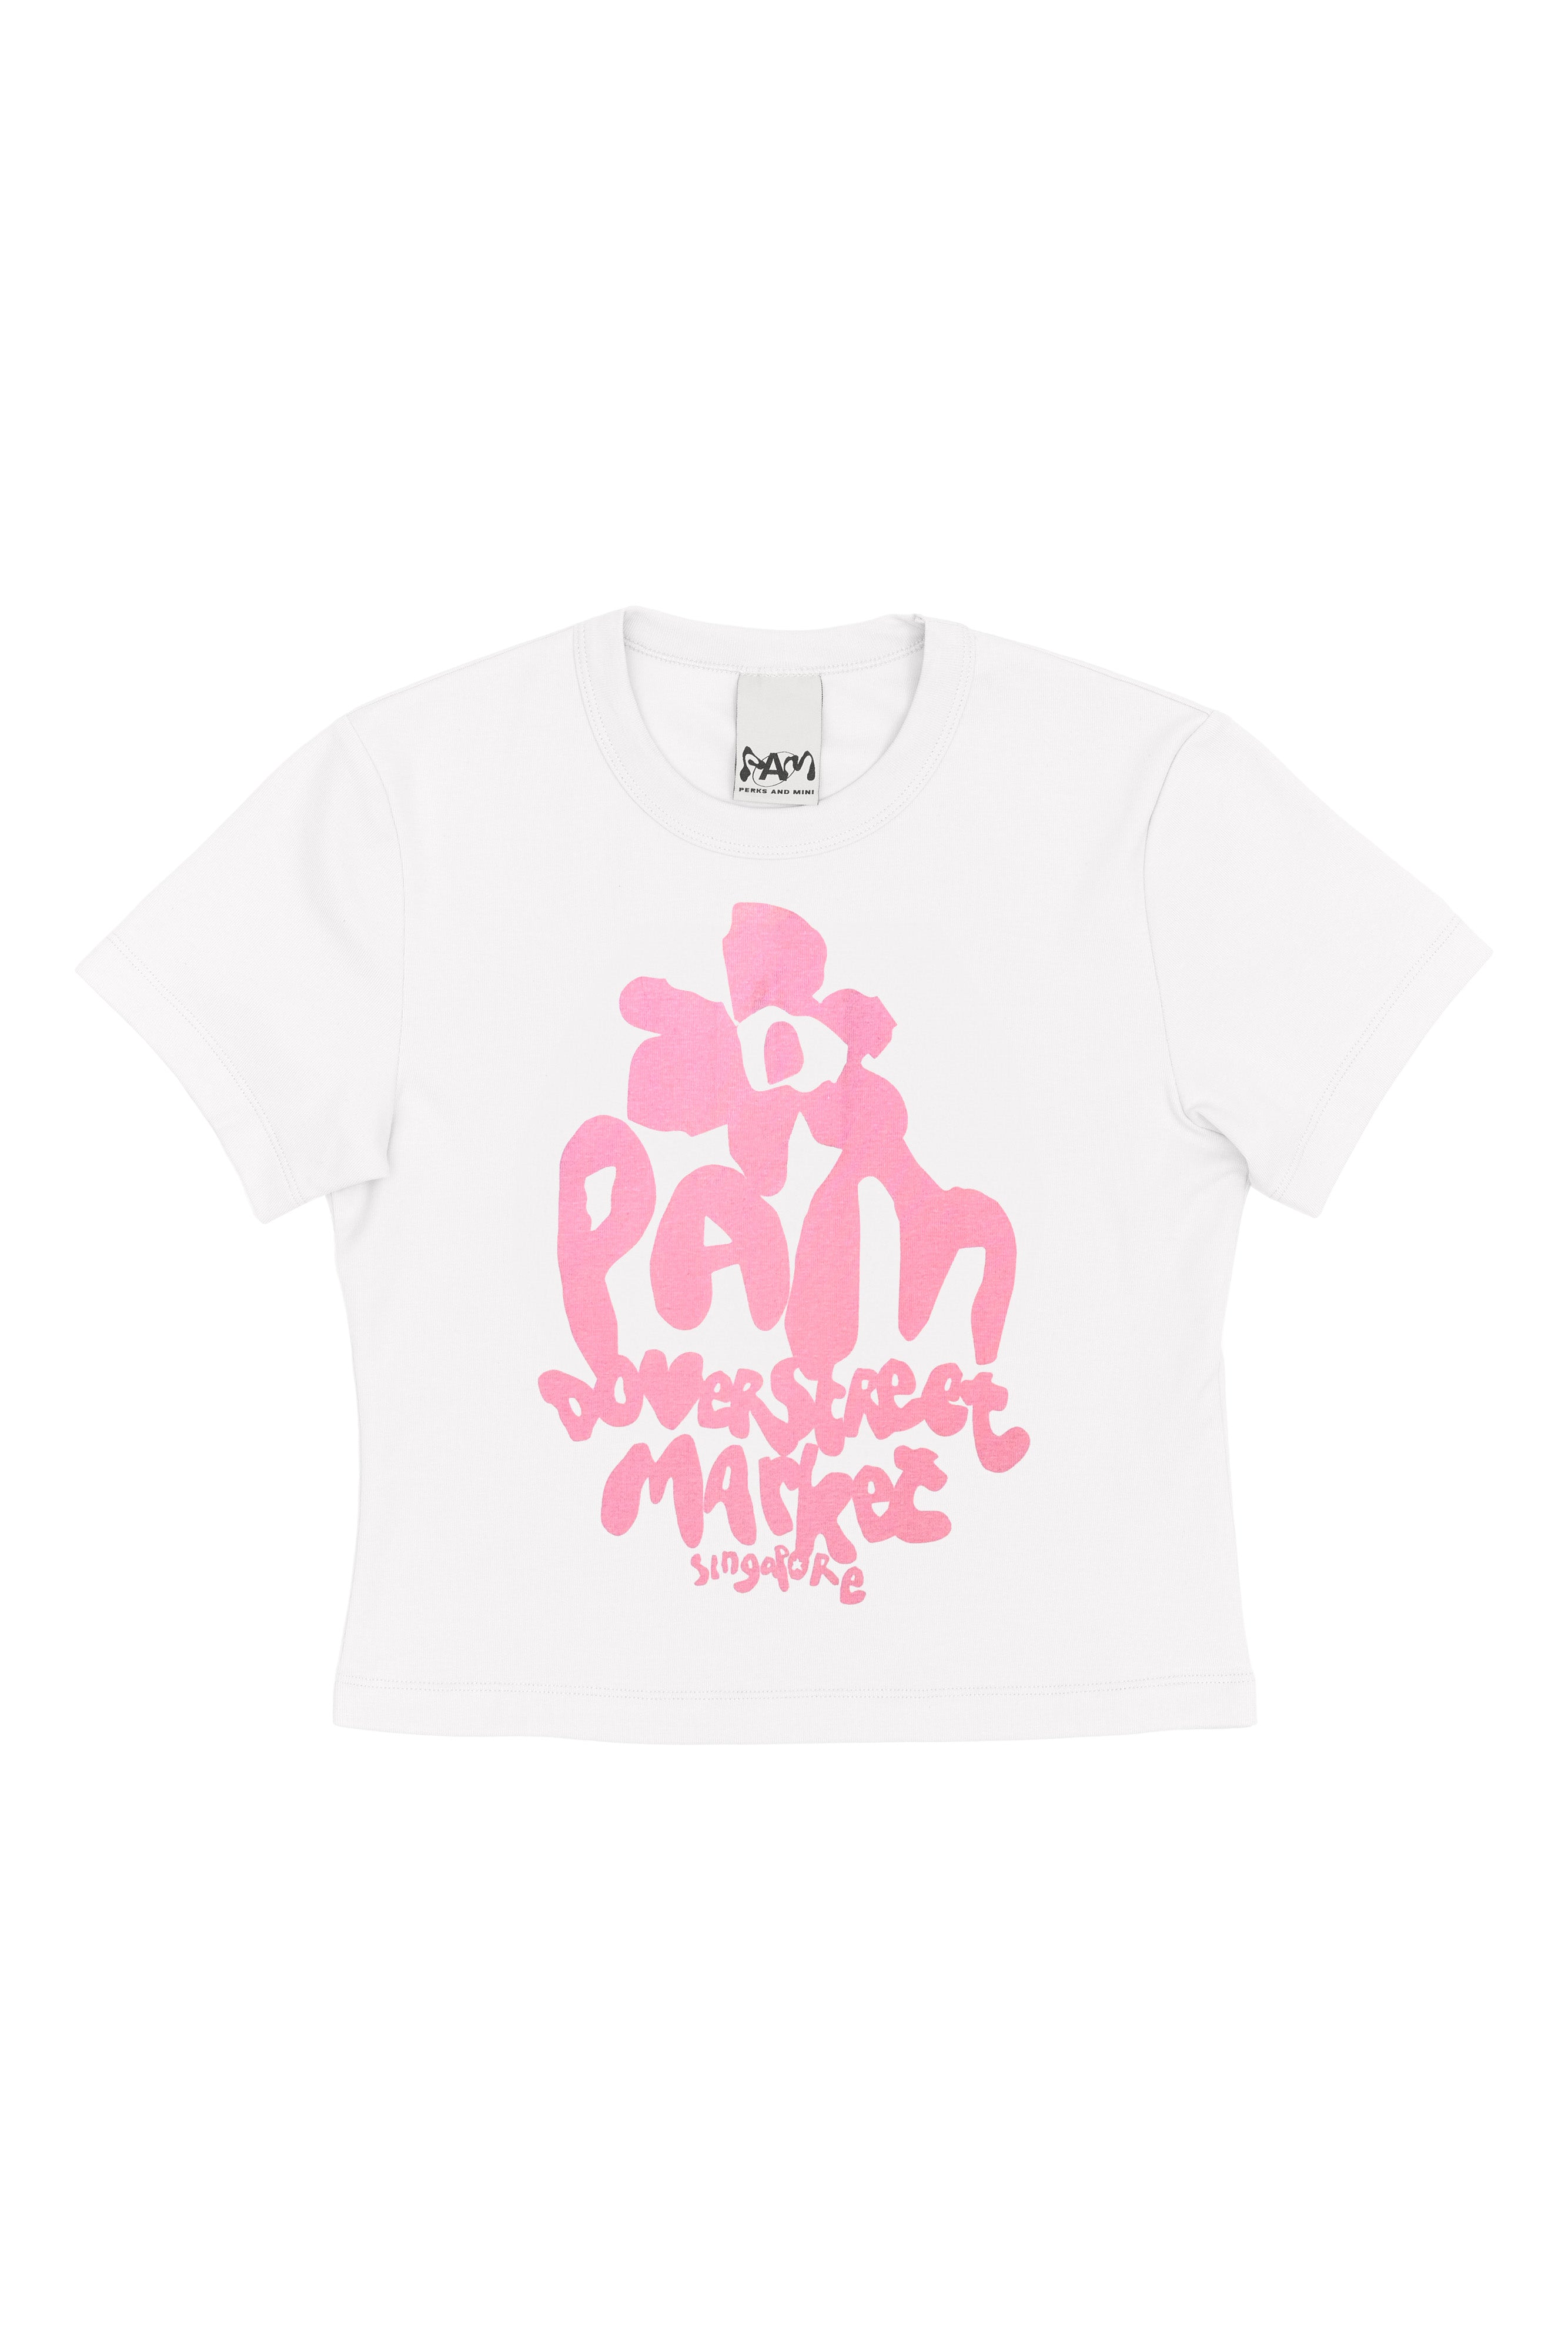 The PAM X DSM BABY TEE  available online with global shipping, and in PAM Stores Melbourne and Sydney.